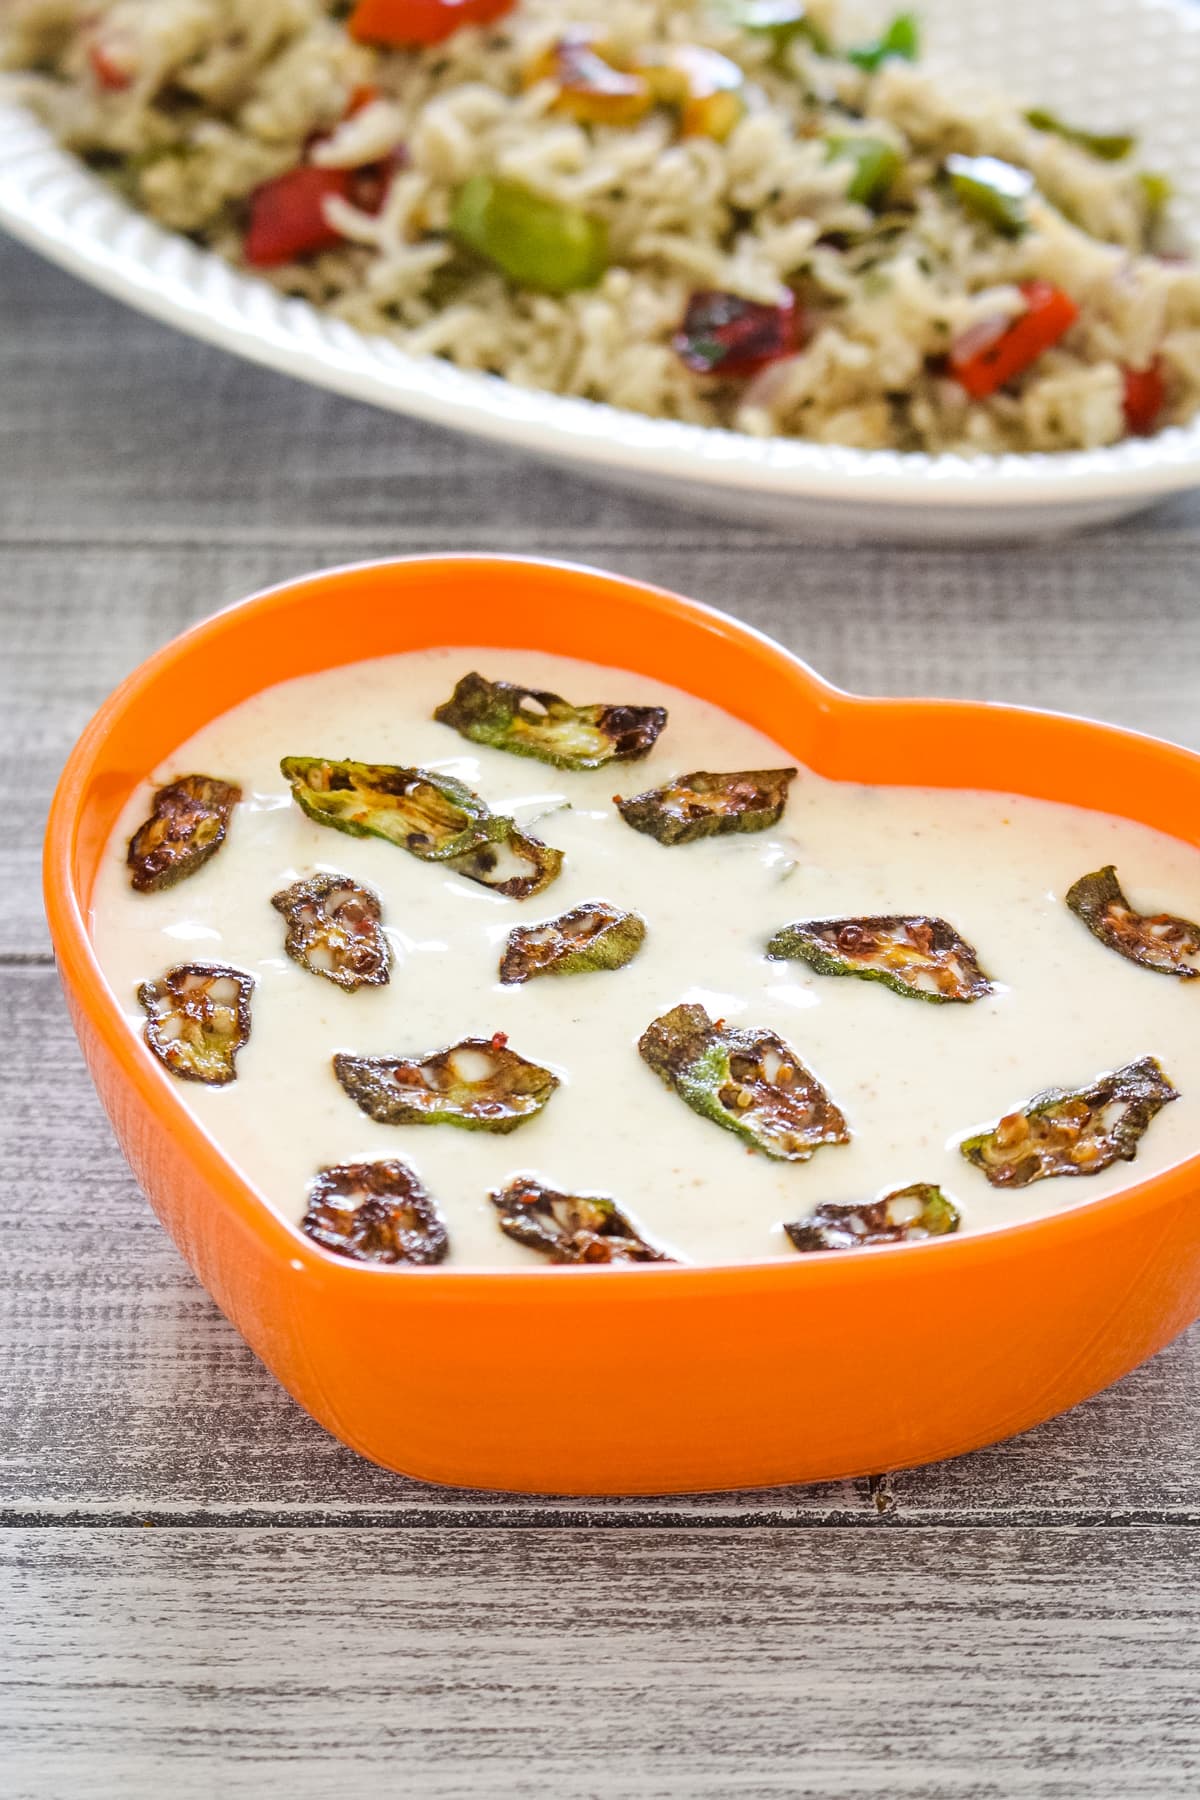 Bhindi raita in a orange bowl with pulao served on the side.